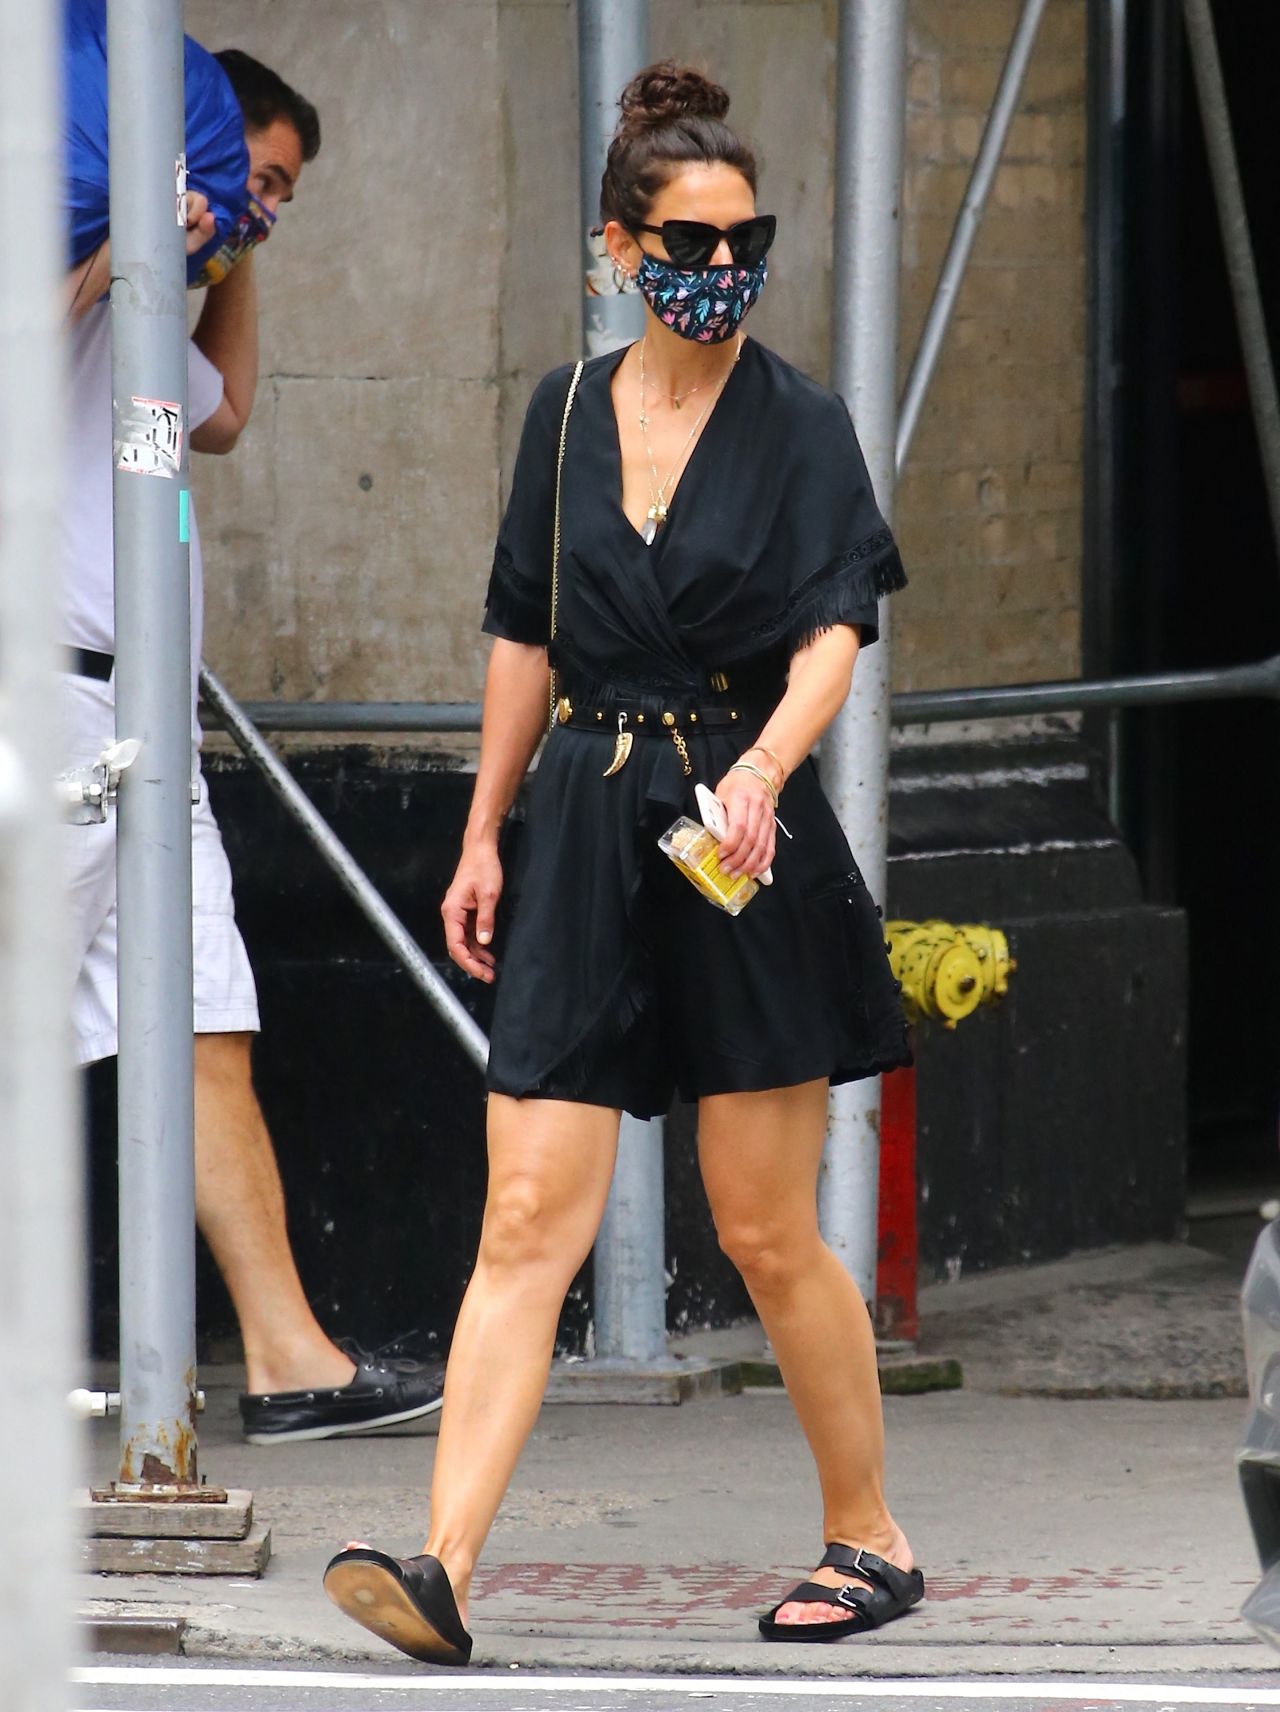 katie-holmes-with-face-mask-soho-in-new-york-07-15-2020-0.jpg